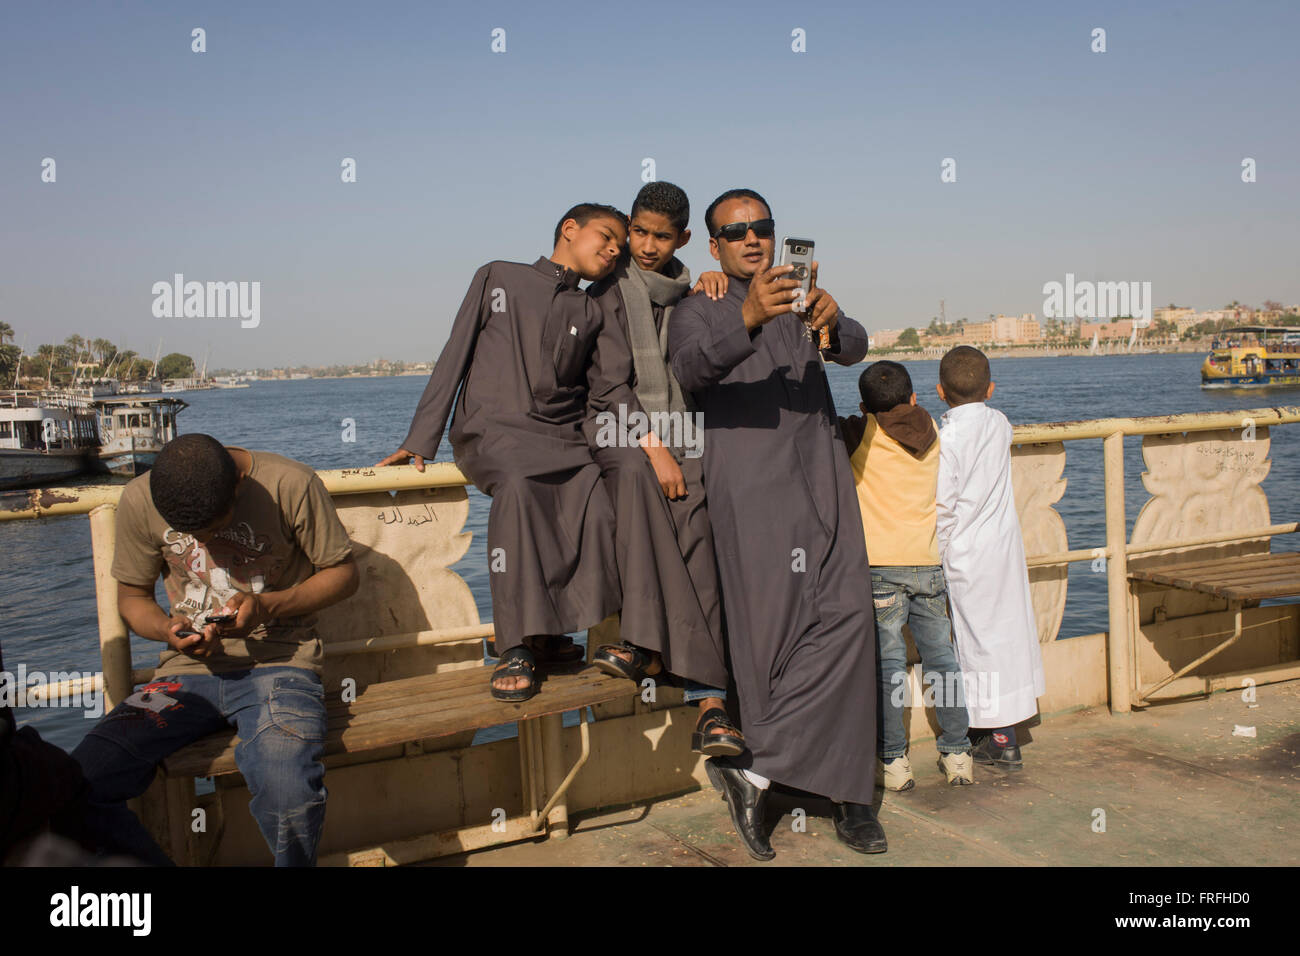 A father takes a selfie with his two boys on the top deck of the state-run ferry across the River Nile at Luxor, Nile Valley, Egypt. Stock Photo